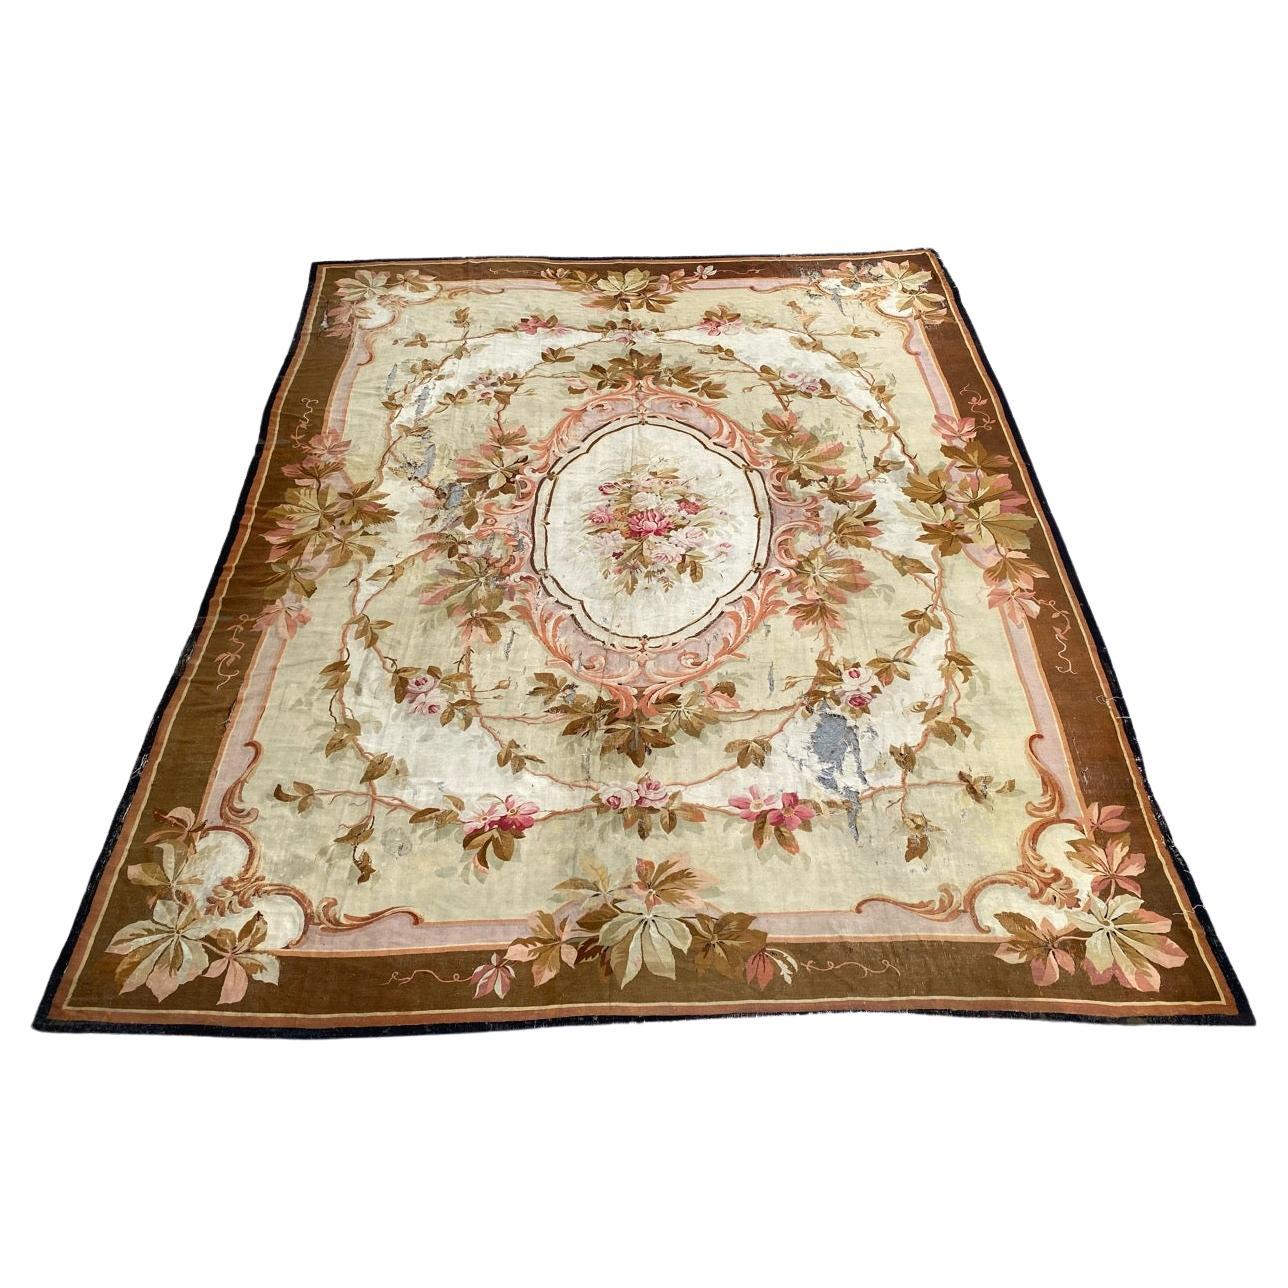 Bobyrug’s Nice Distressed Large Antique Aubusson Flat Rug For Sale